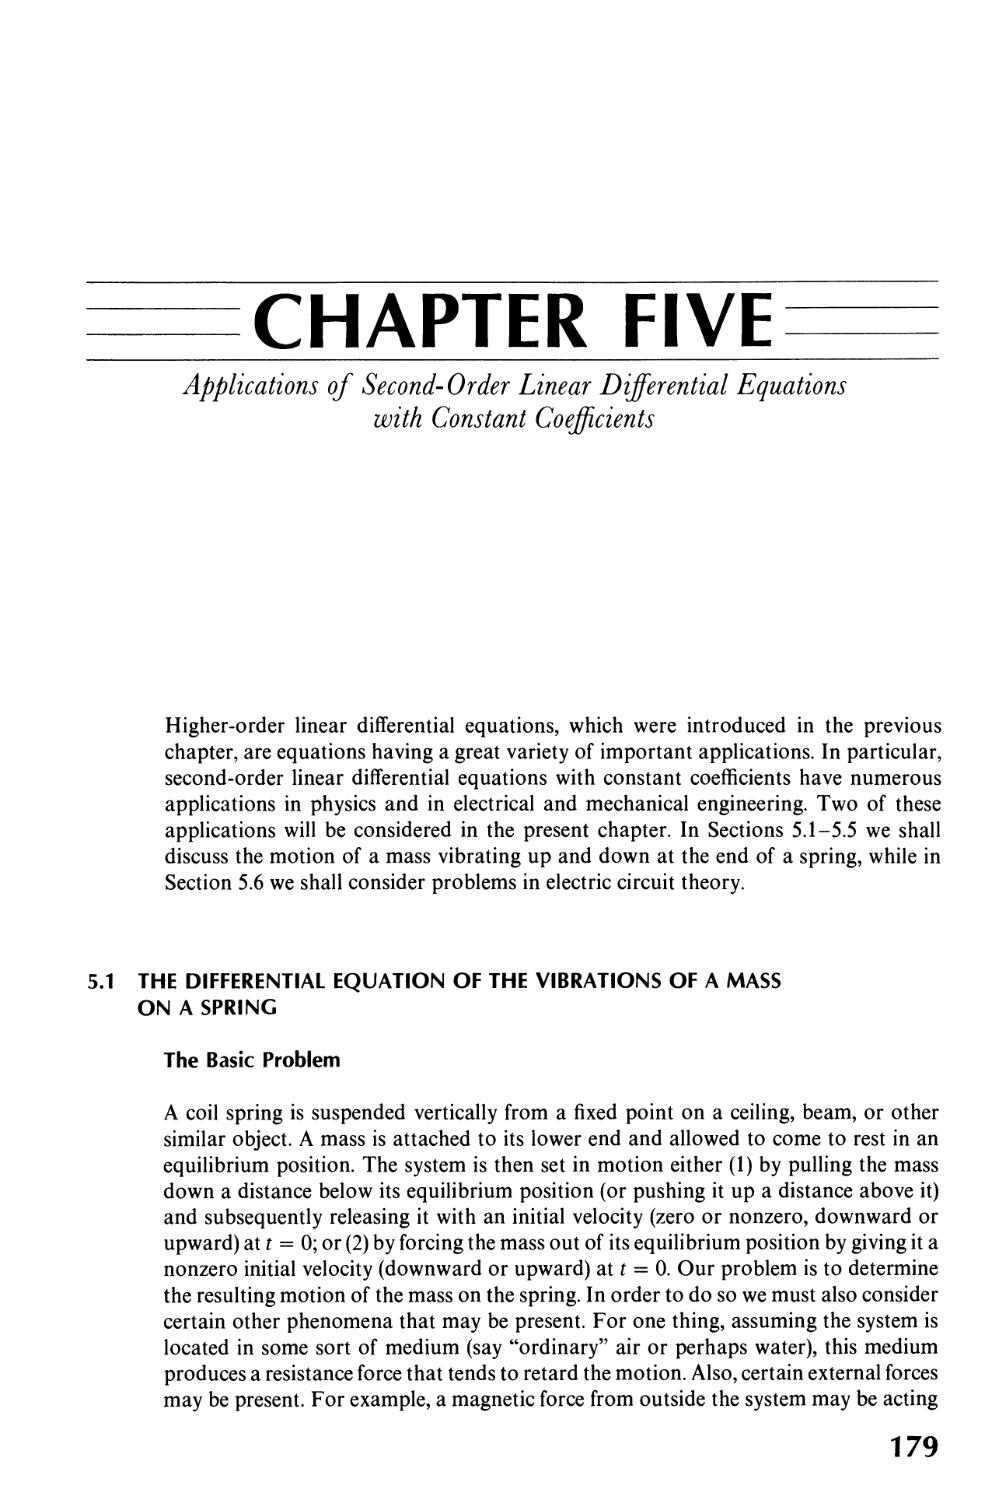 5  Applications of Second-Order Linear Differential Equations 
with Constant Coefficients